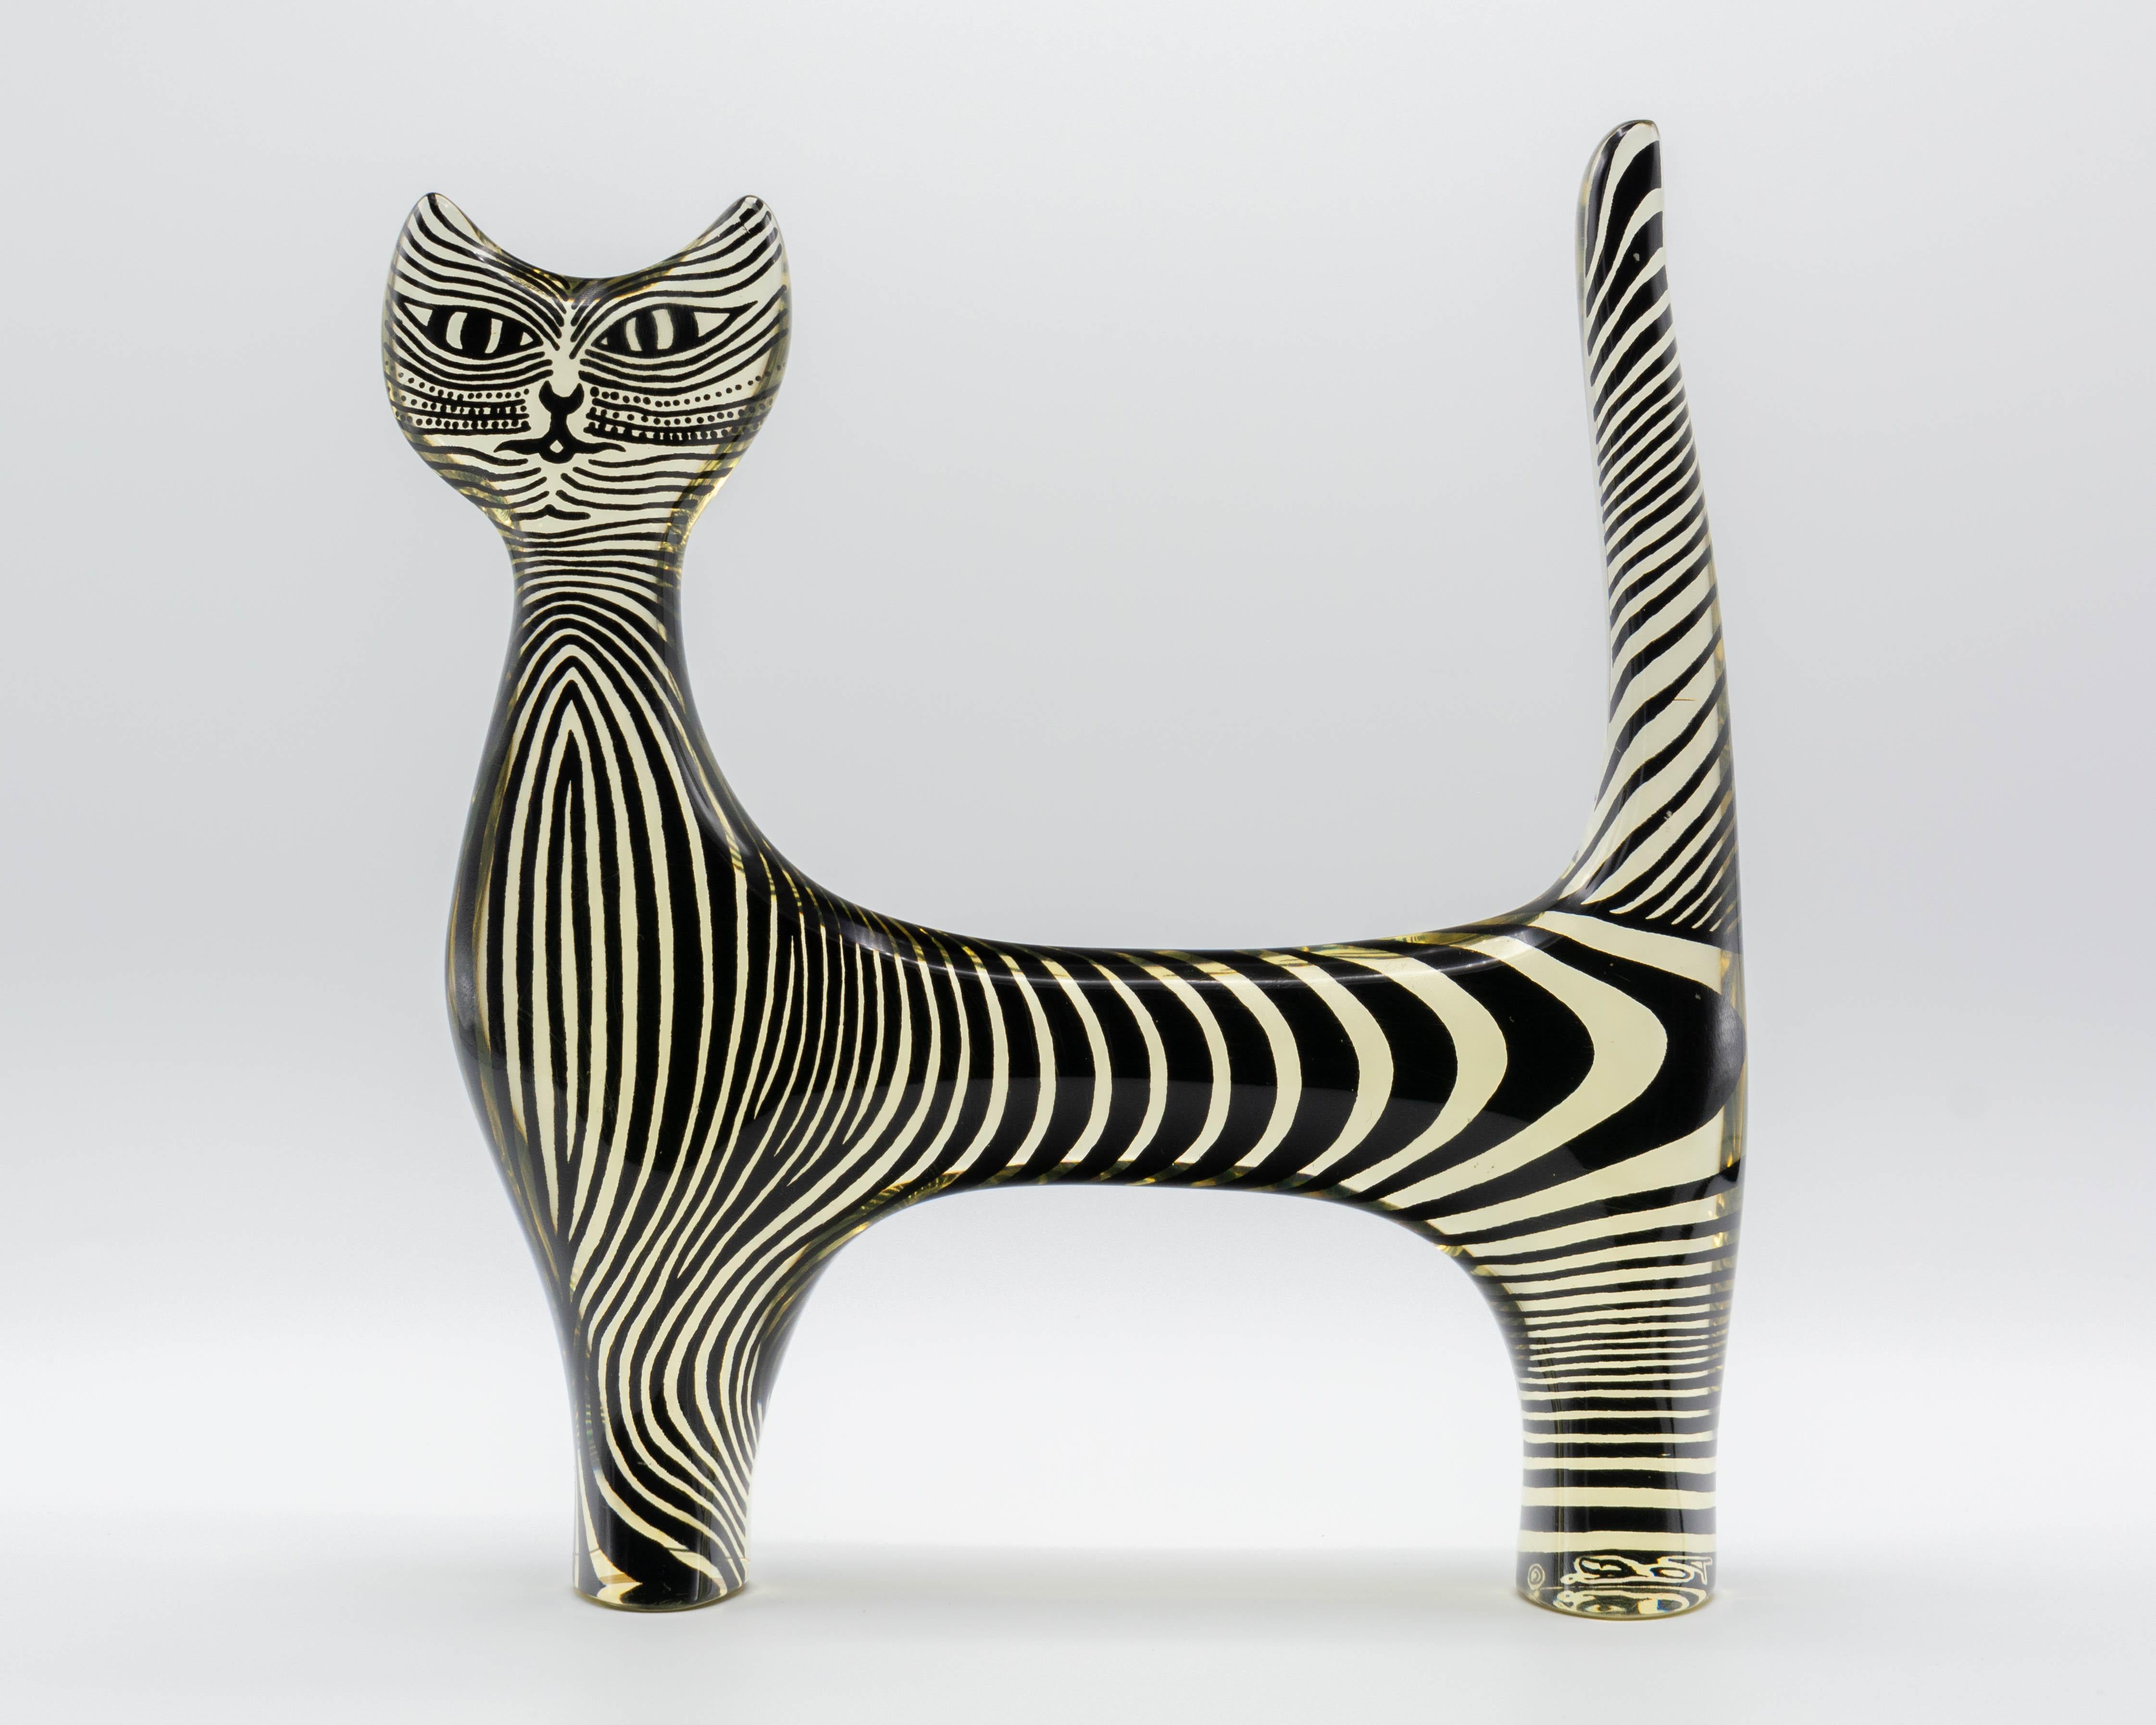 A Mid-Century Modern Lucite Op Art cat designed by Abraham Palatnik. Original label on bottom: Made in Brasil. Abraham Palatnik (born in 1928) is a Brazilian artist and inventor whose innovations include kinechromatic art. Part of the Artemis